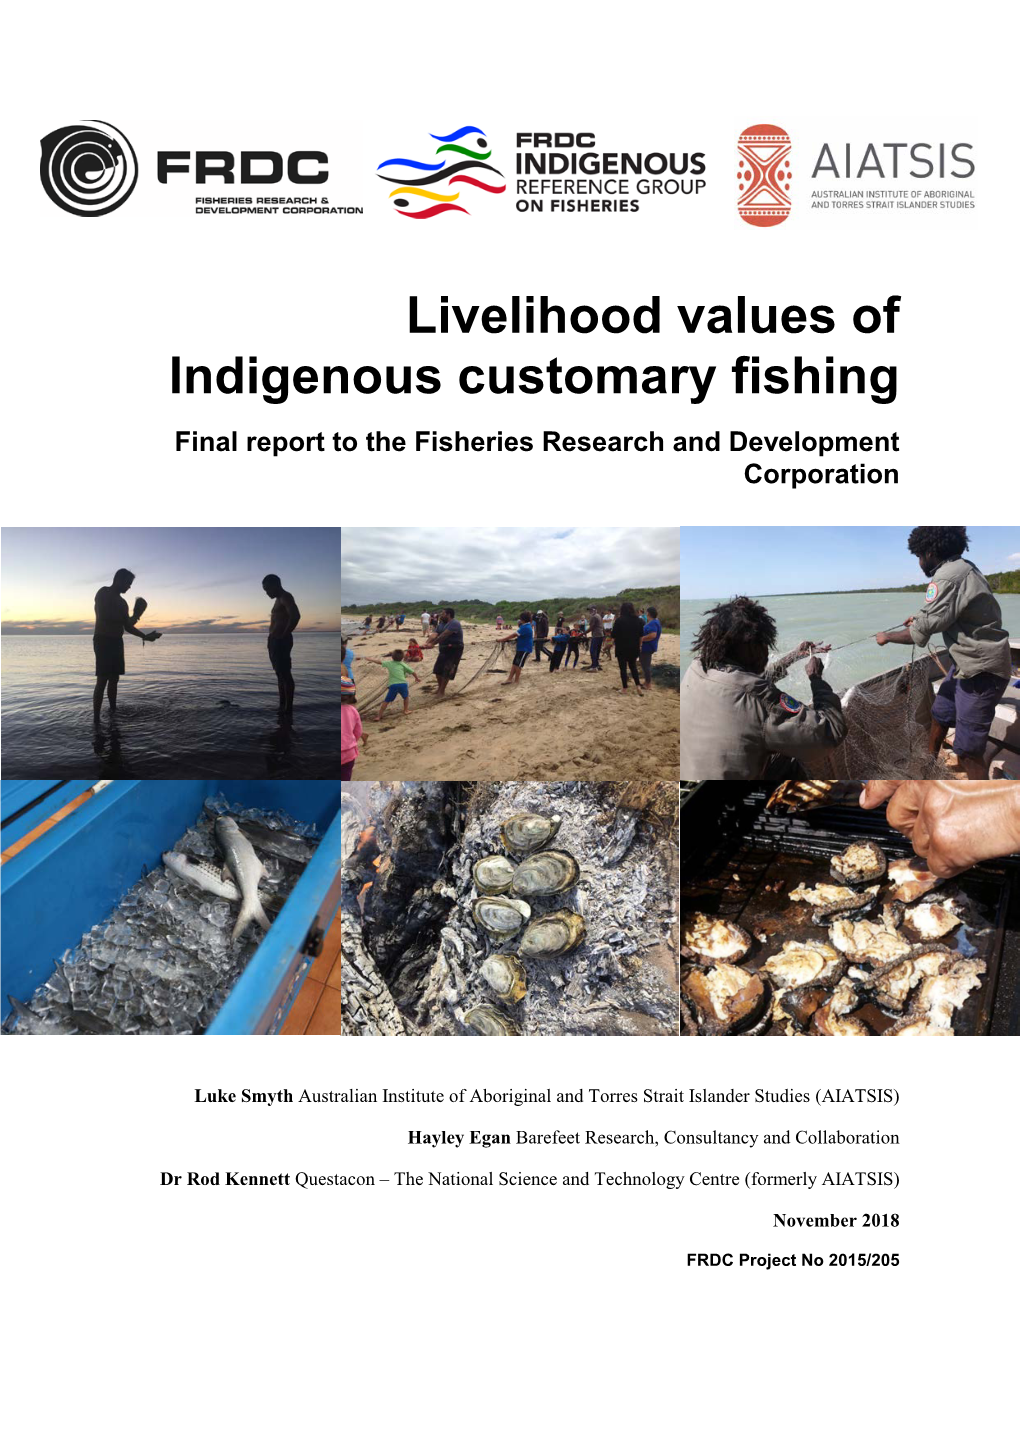 Livelihood Values of Indigenous Customary Fishing Final Report to the Fisheries Research and Development Corporation